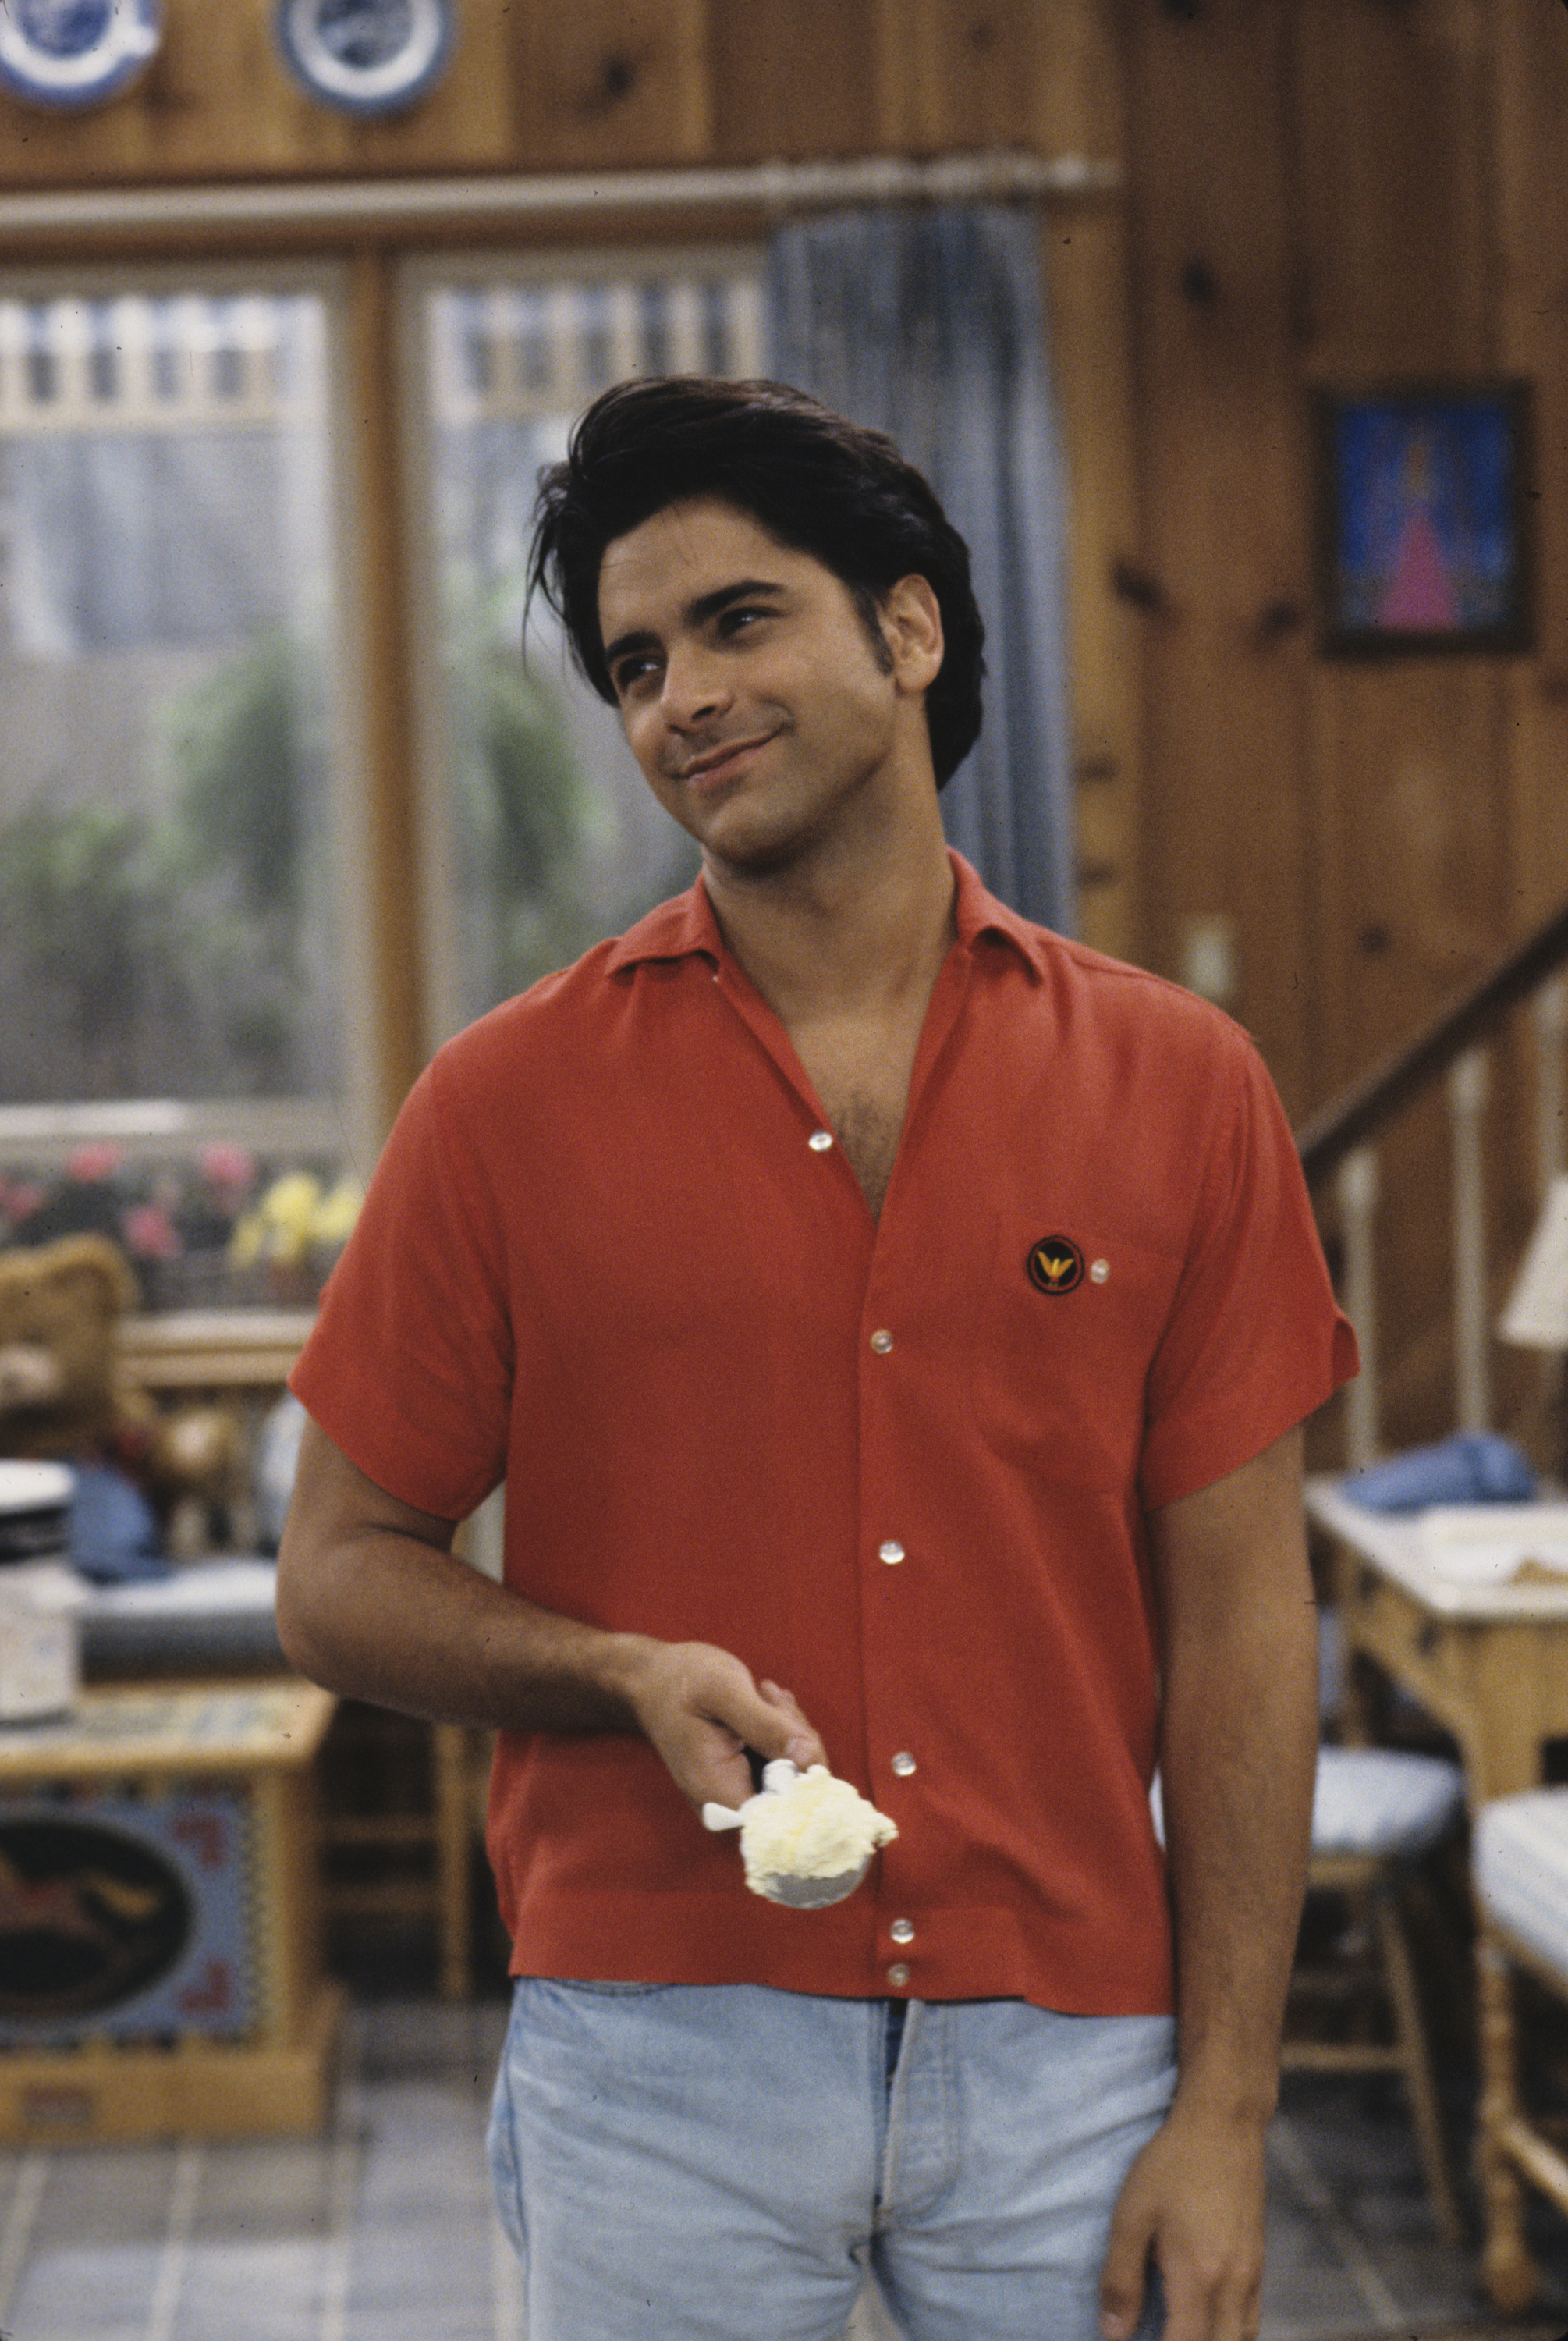 John Stamos as Jesse during Season 5 of the American sitcom "Full House" on November 5, 1991| Source: Getty Images